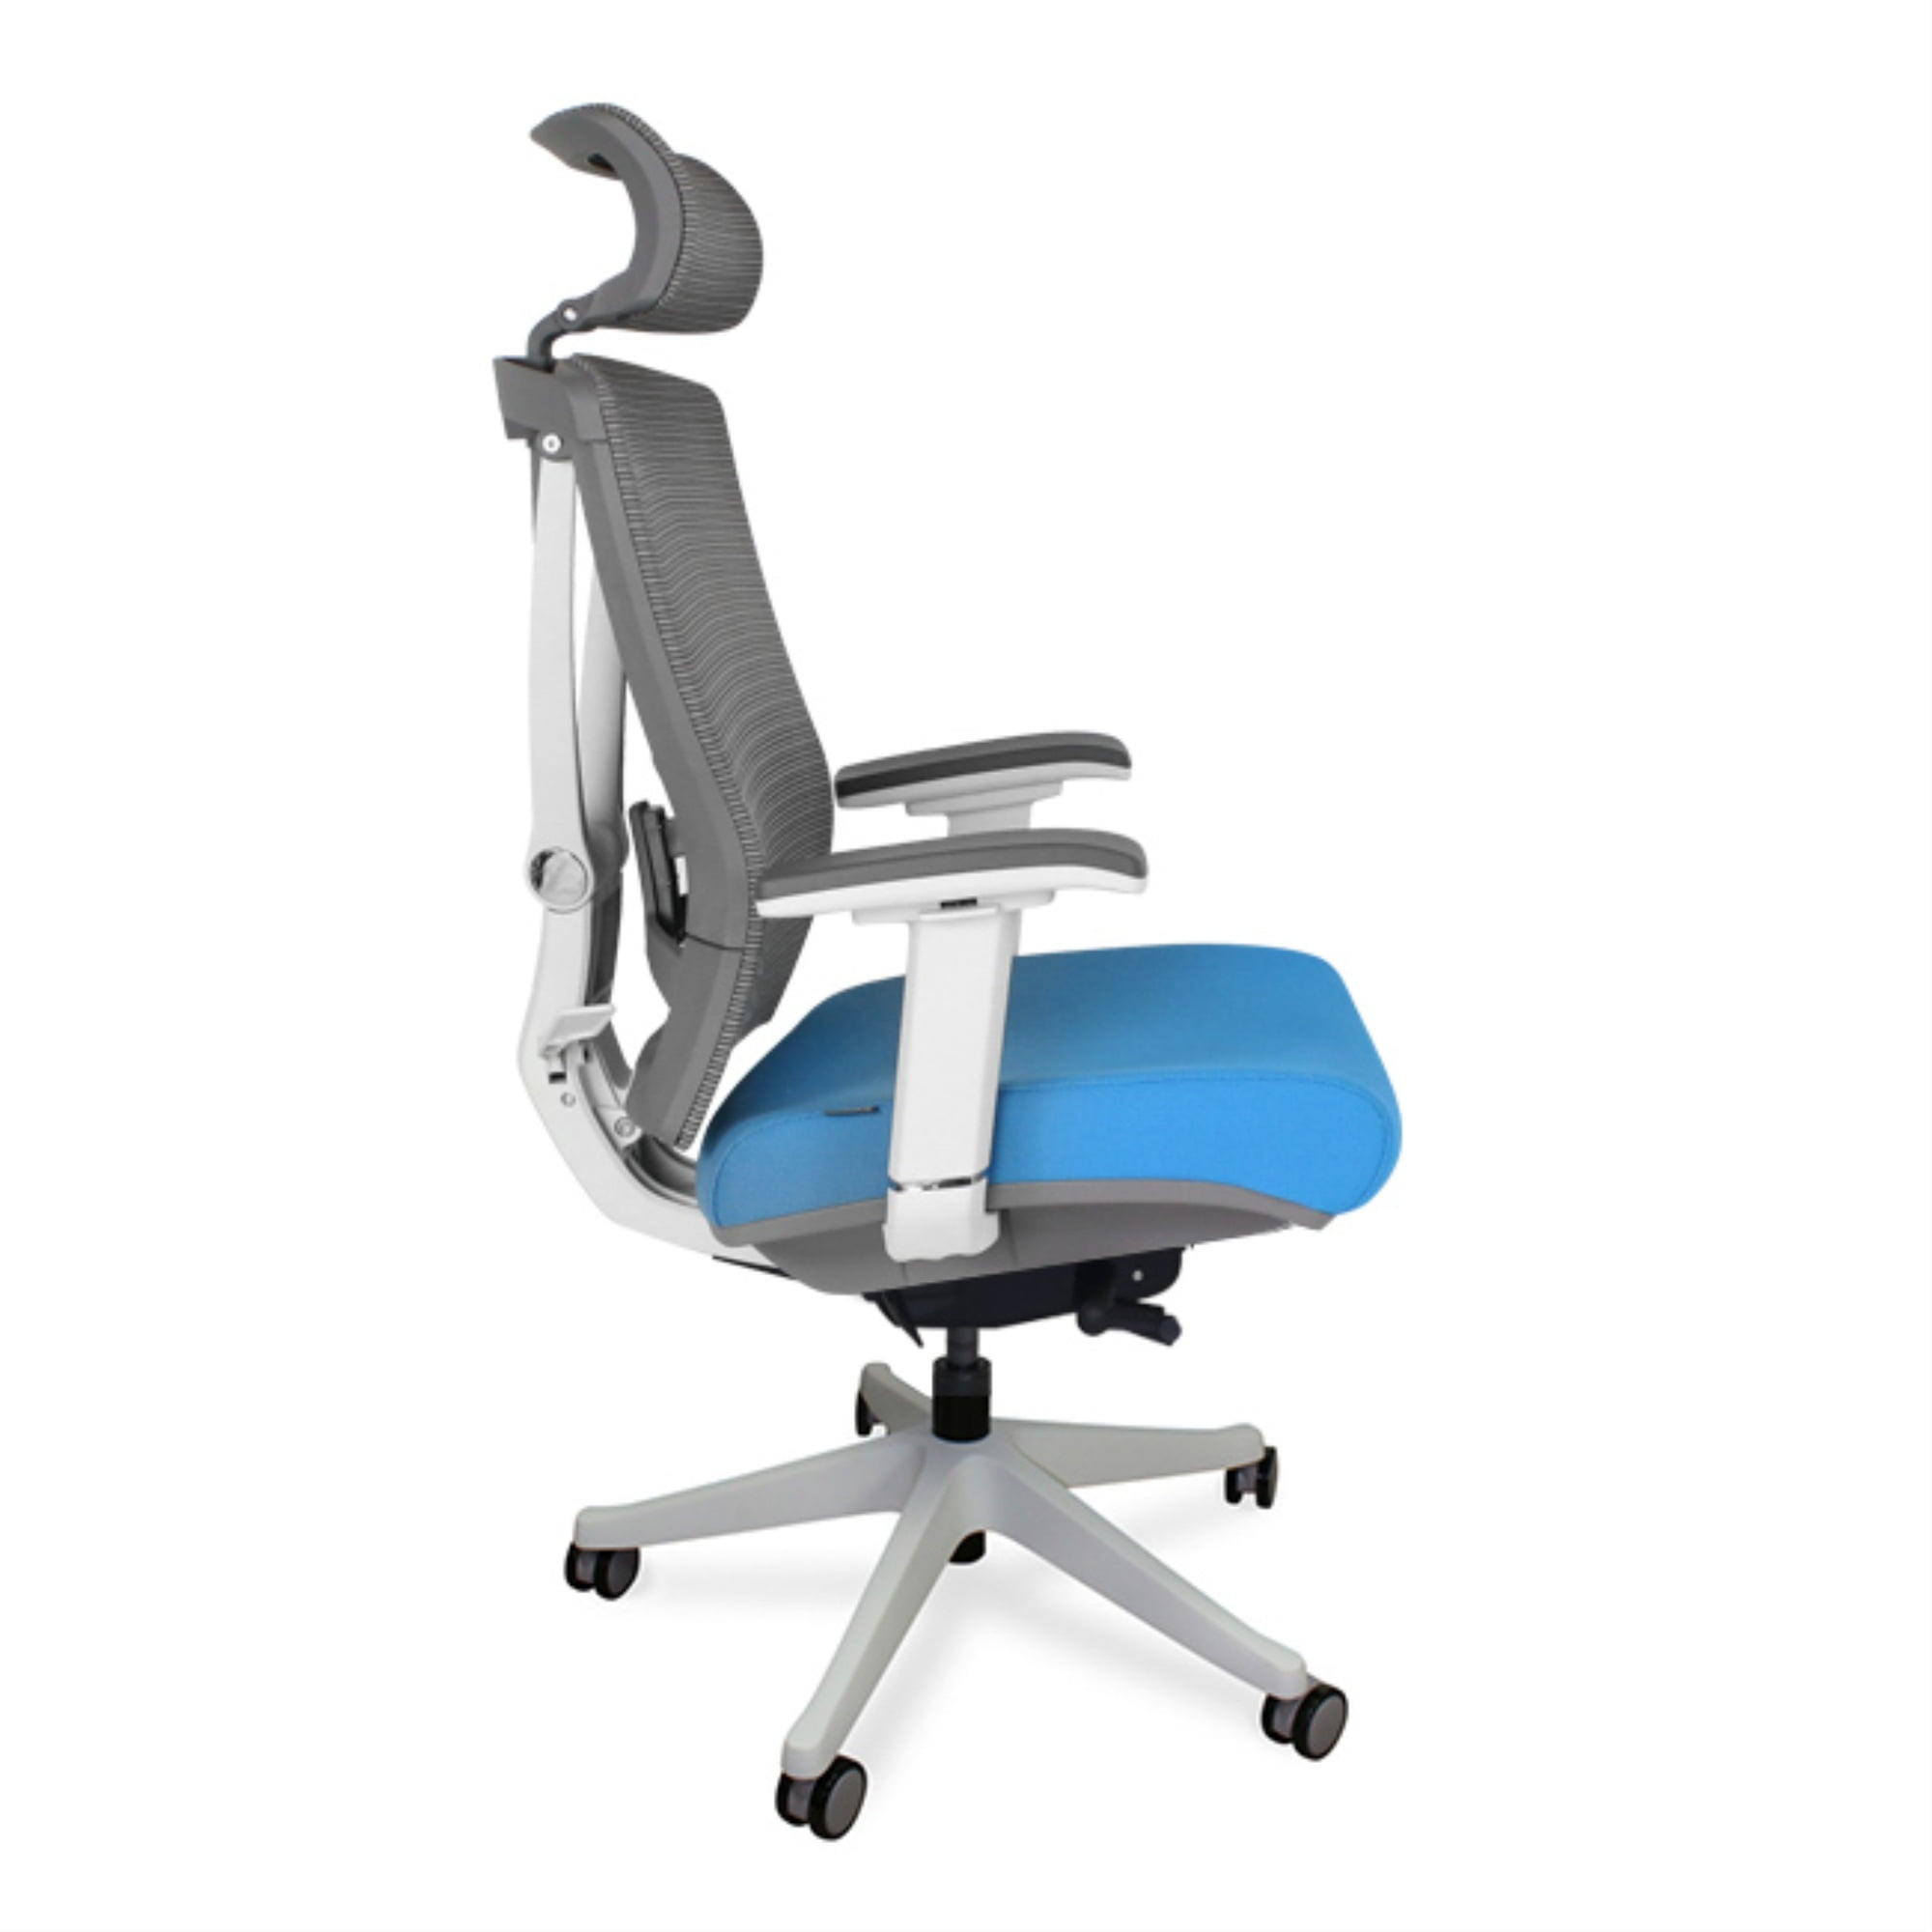 Dropship High Back Office Chair, Adjustable Ergonomic Office Chair